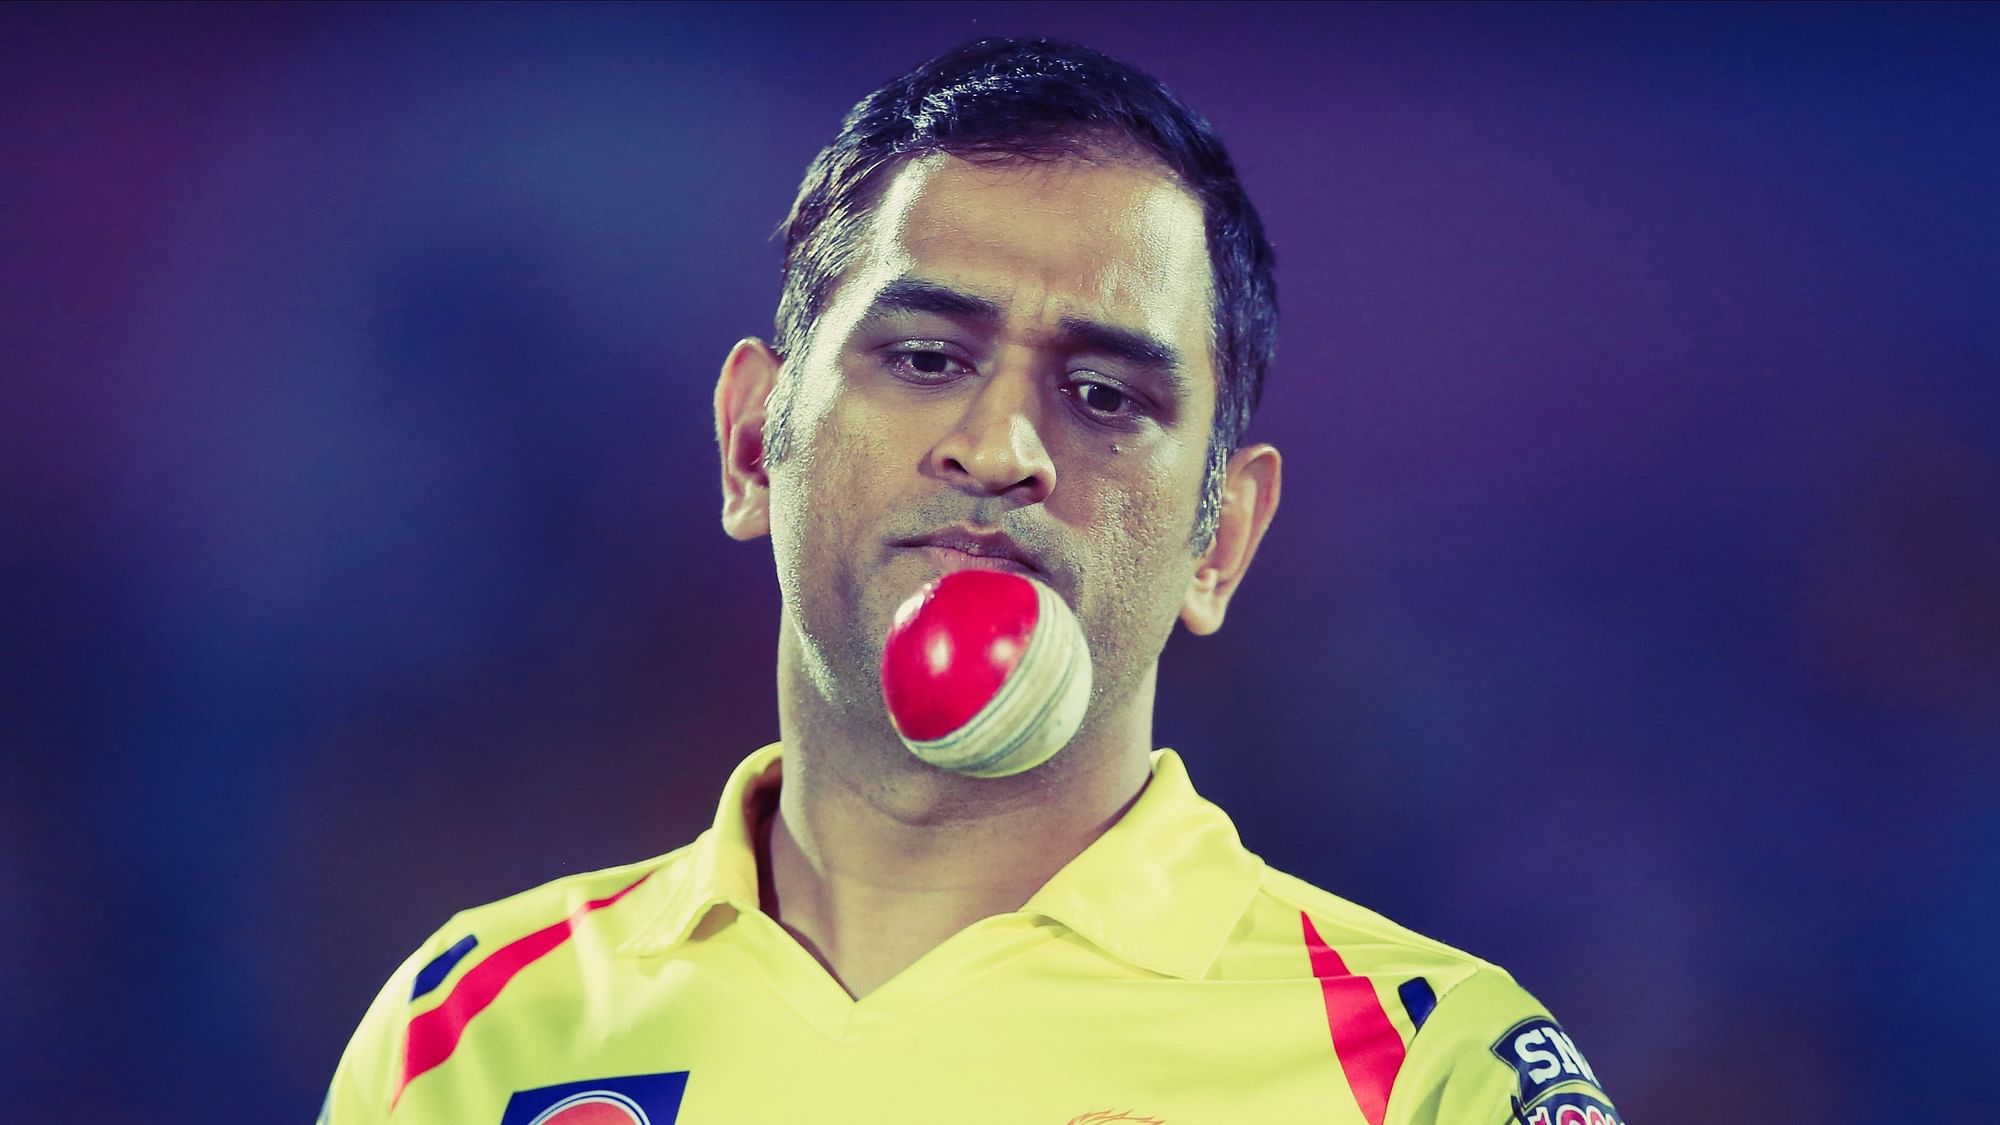 During the IPL 2019 match against Rajasthan Royals, MS Dhoni walked out to the middle again – to remonstrate with the umpires about an incorrect decision. 